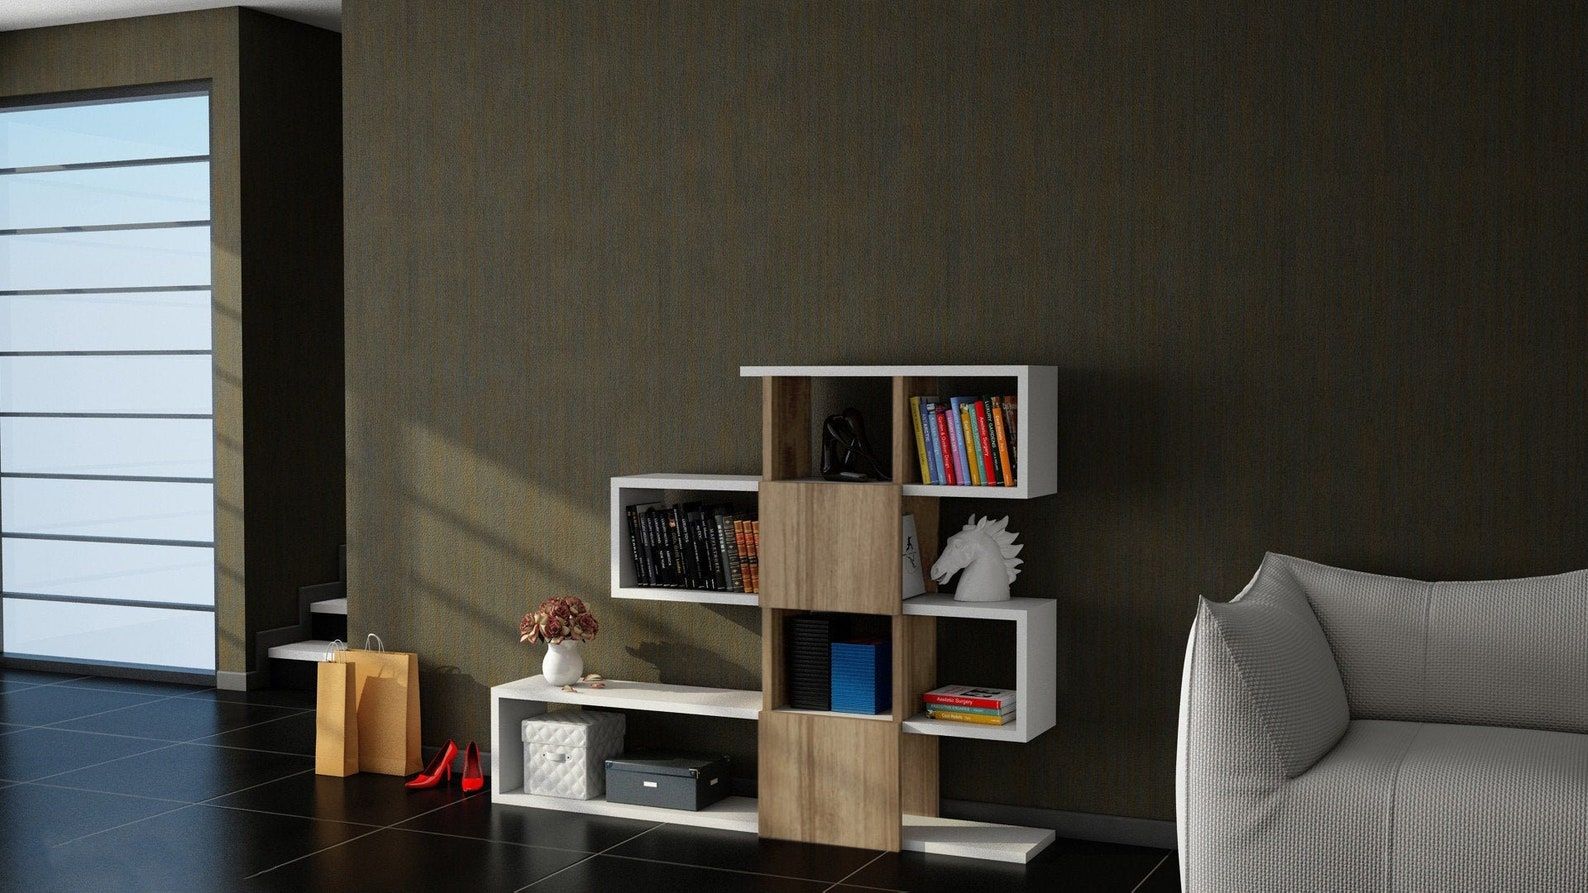 modern geometric bookcase in a living room with books and knick knacks in each cube.